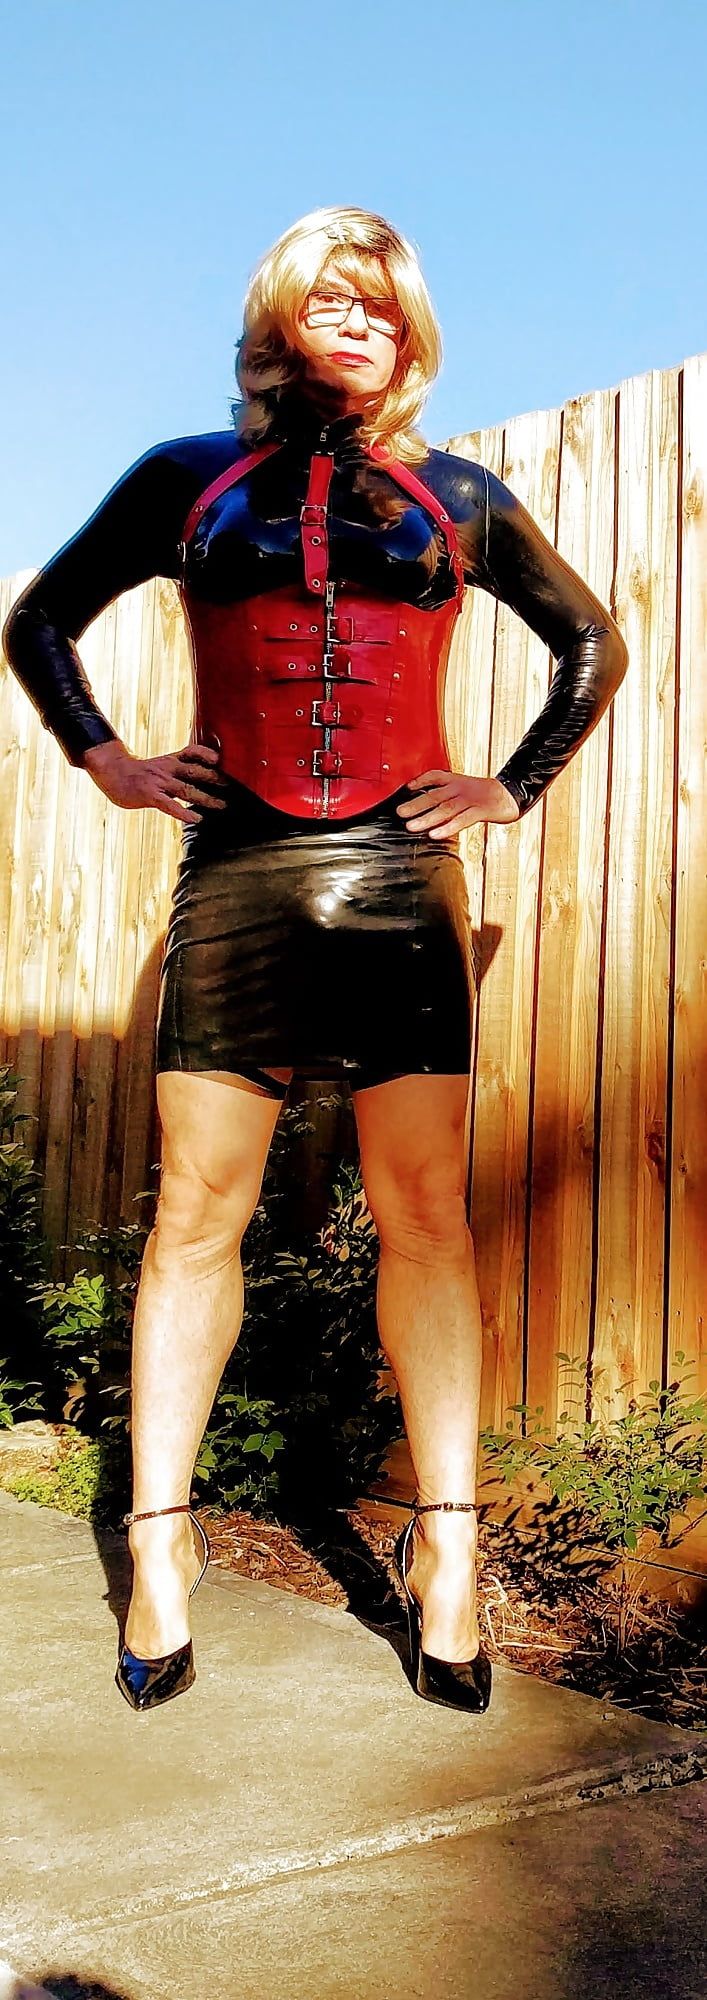 New latex skirt on a sunny Melbourne day #4